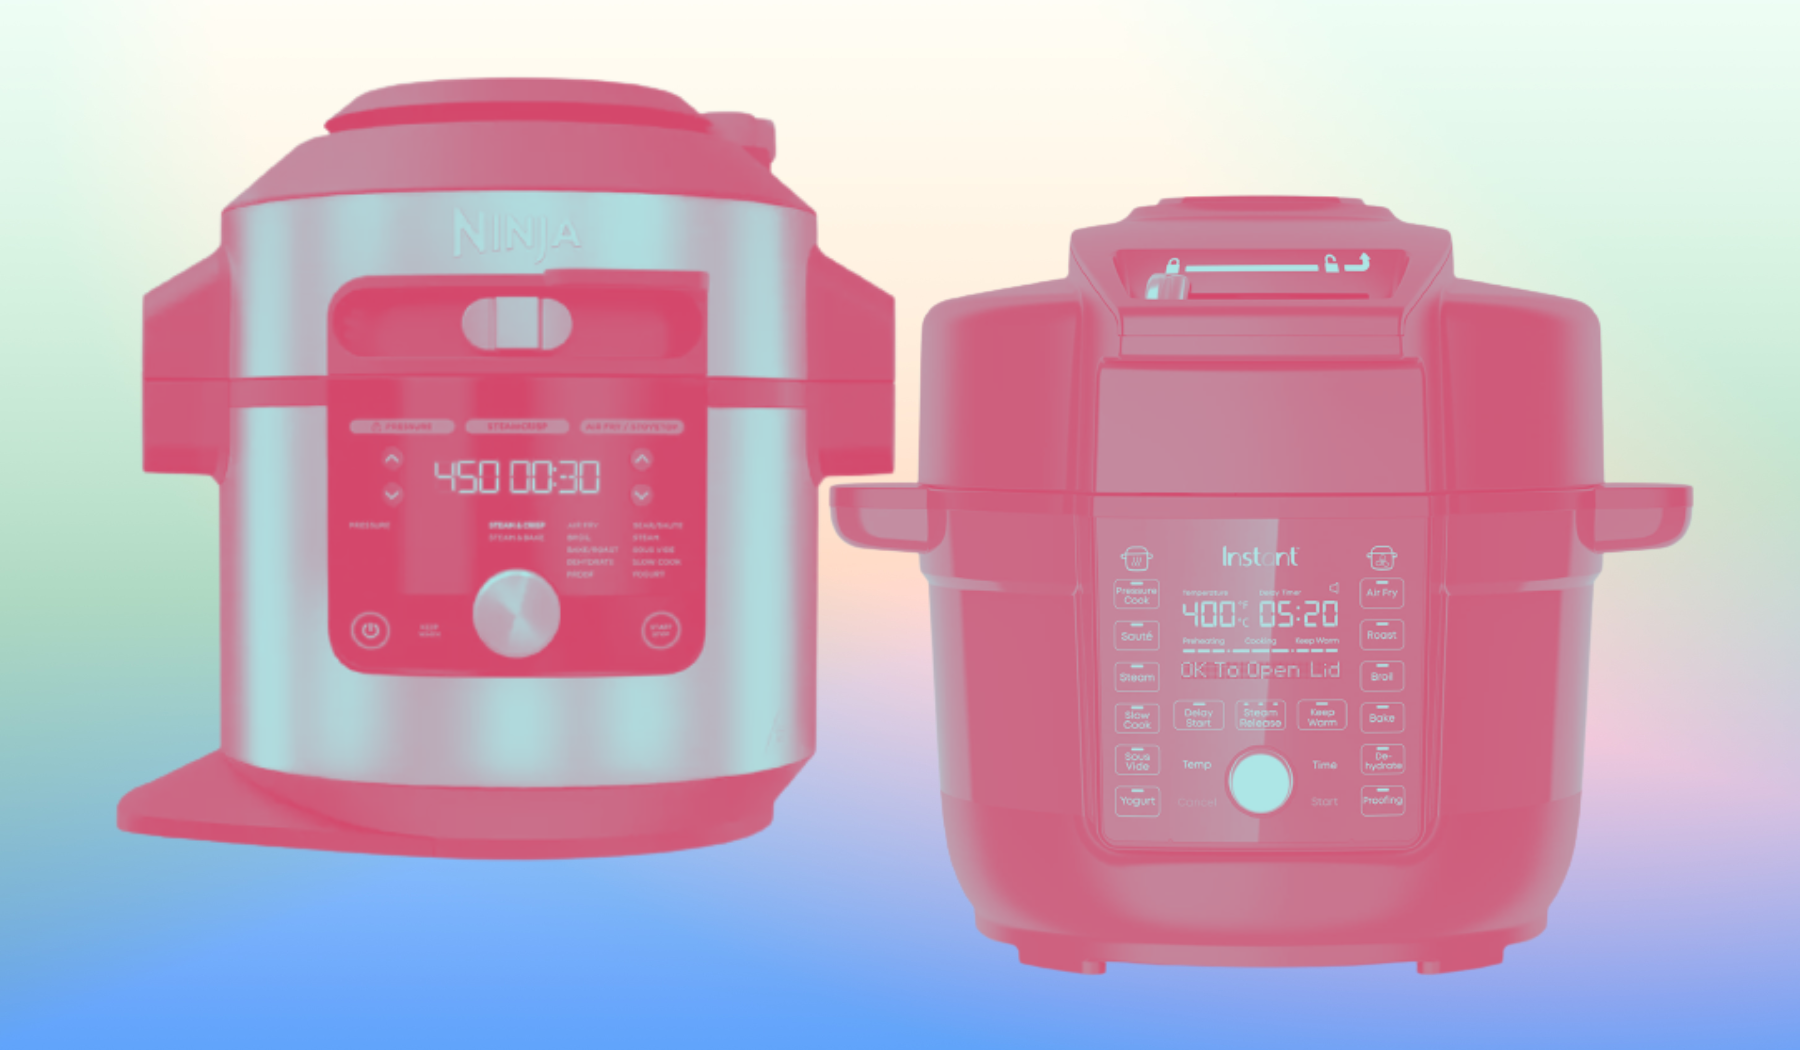 Walmart has an Instant Pot for $50 and a Ninja Foodi for $150 off